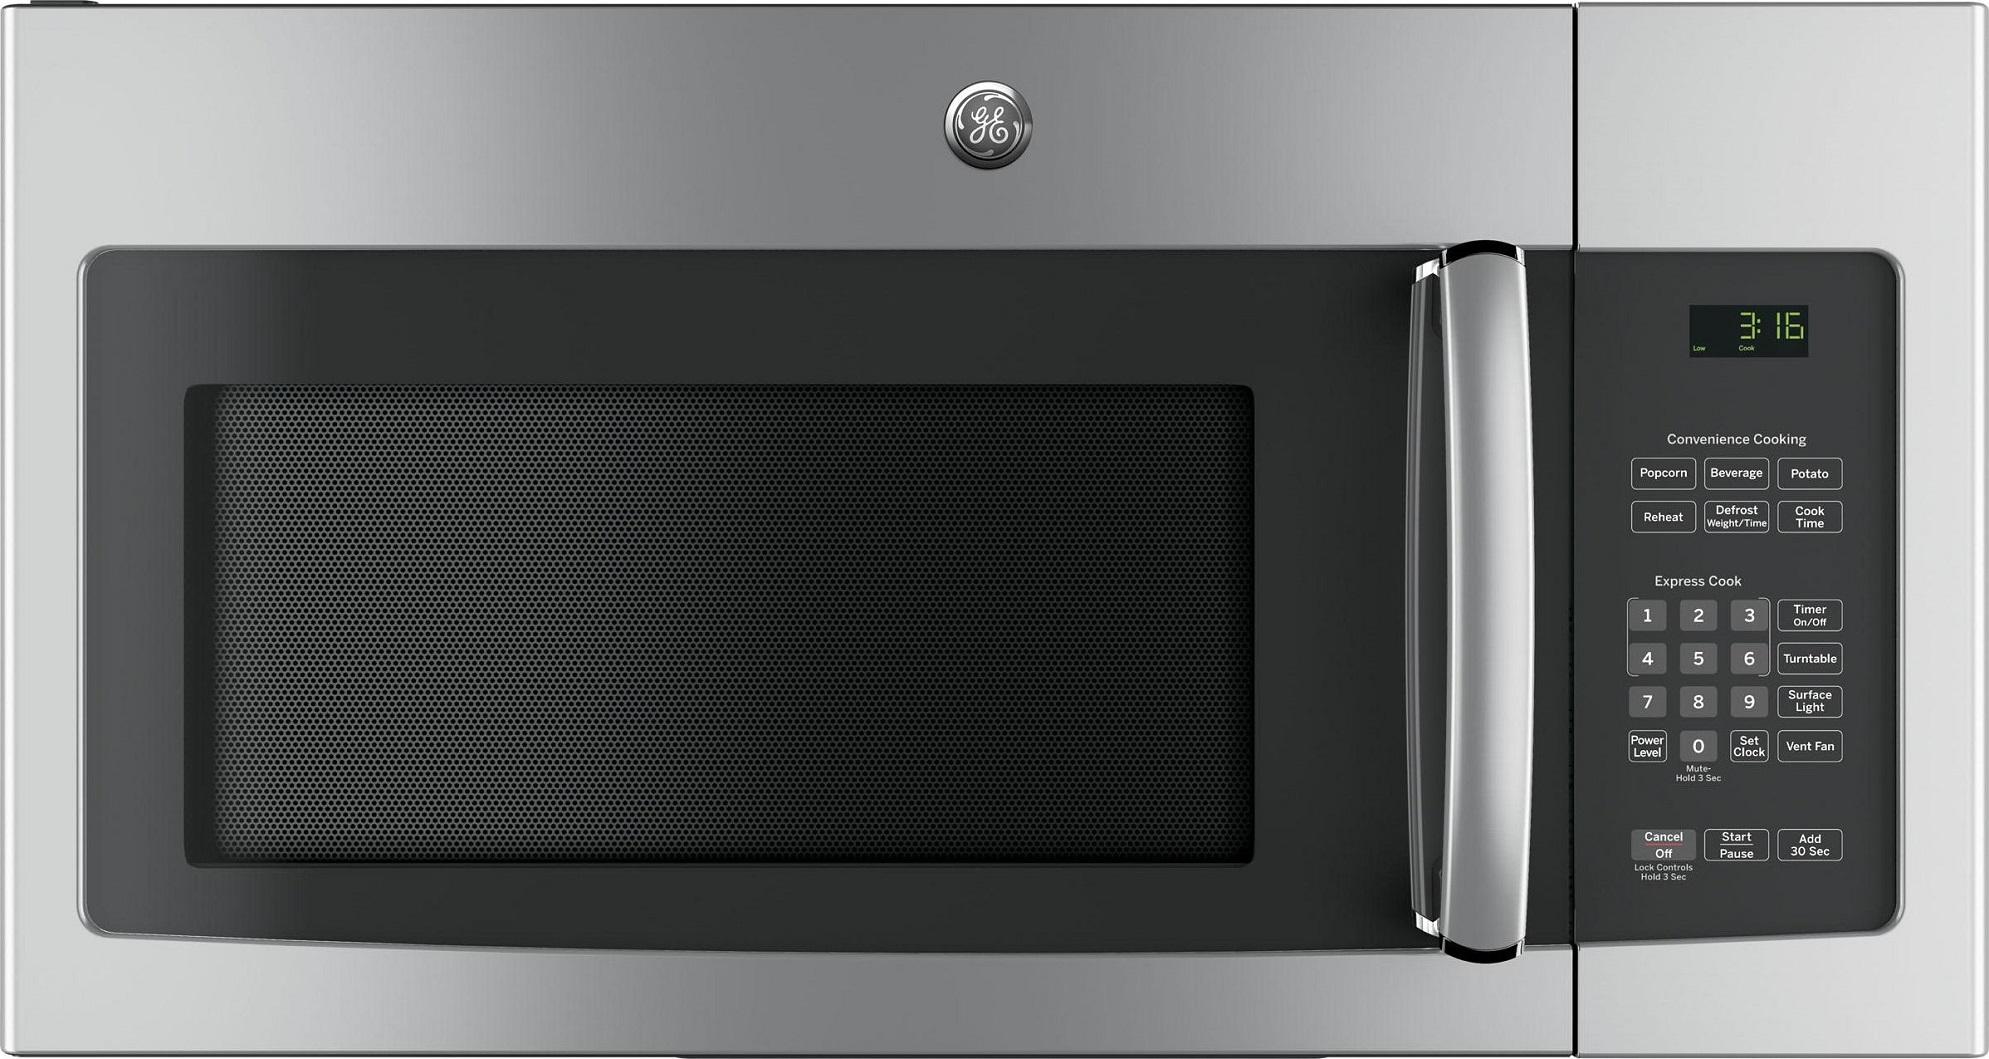 General Electric JNM3163RJSS 30 Inch Over the Range Microwave Oven with Recirculating Venting